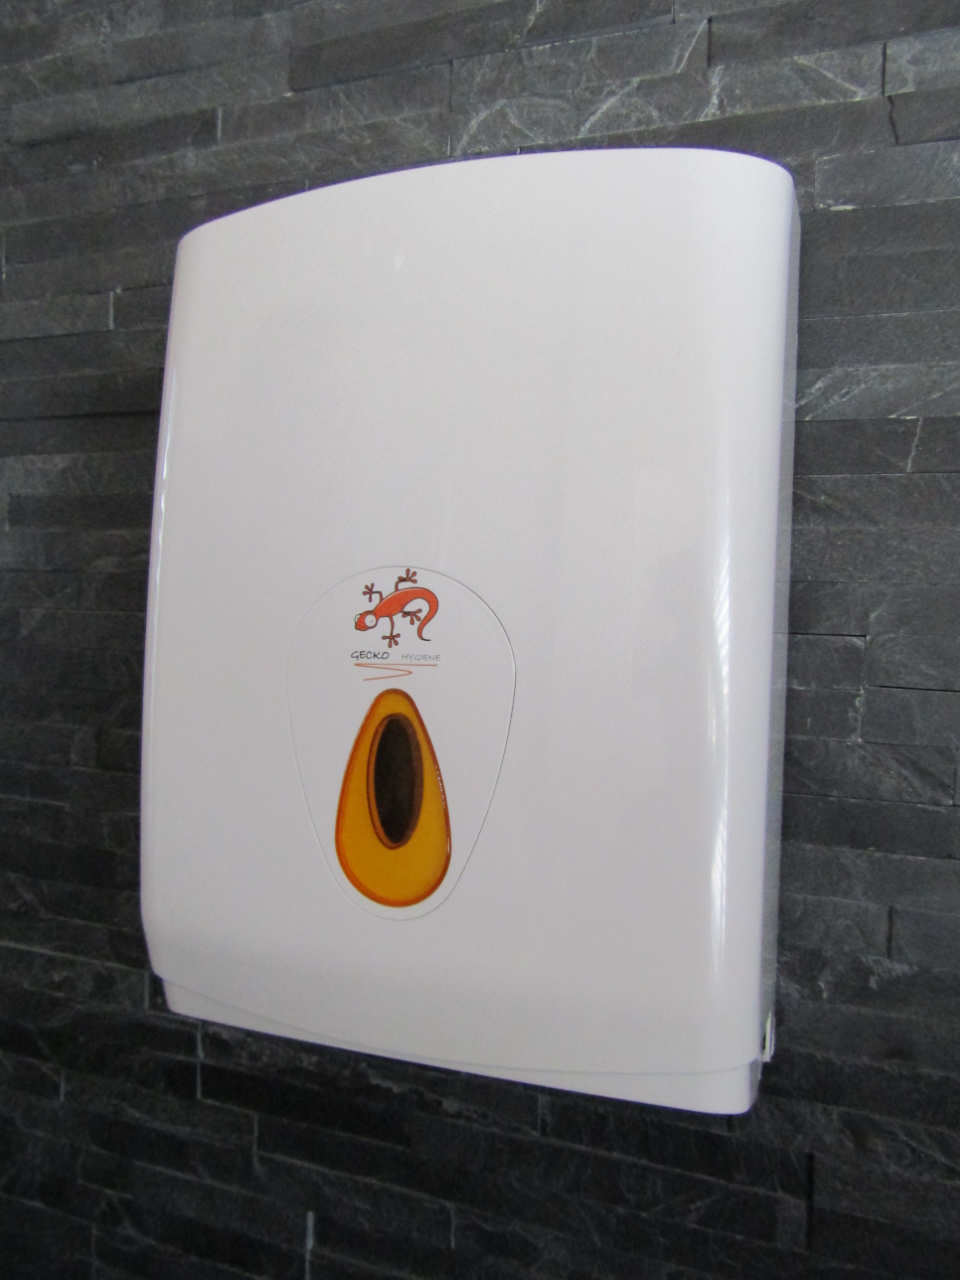 Photo of Hand Towel Dispenser - Consumable washroom products